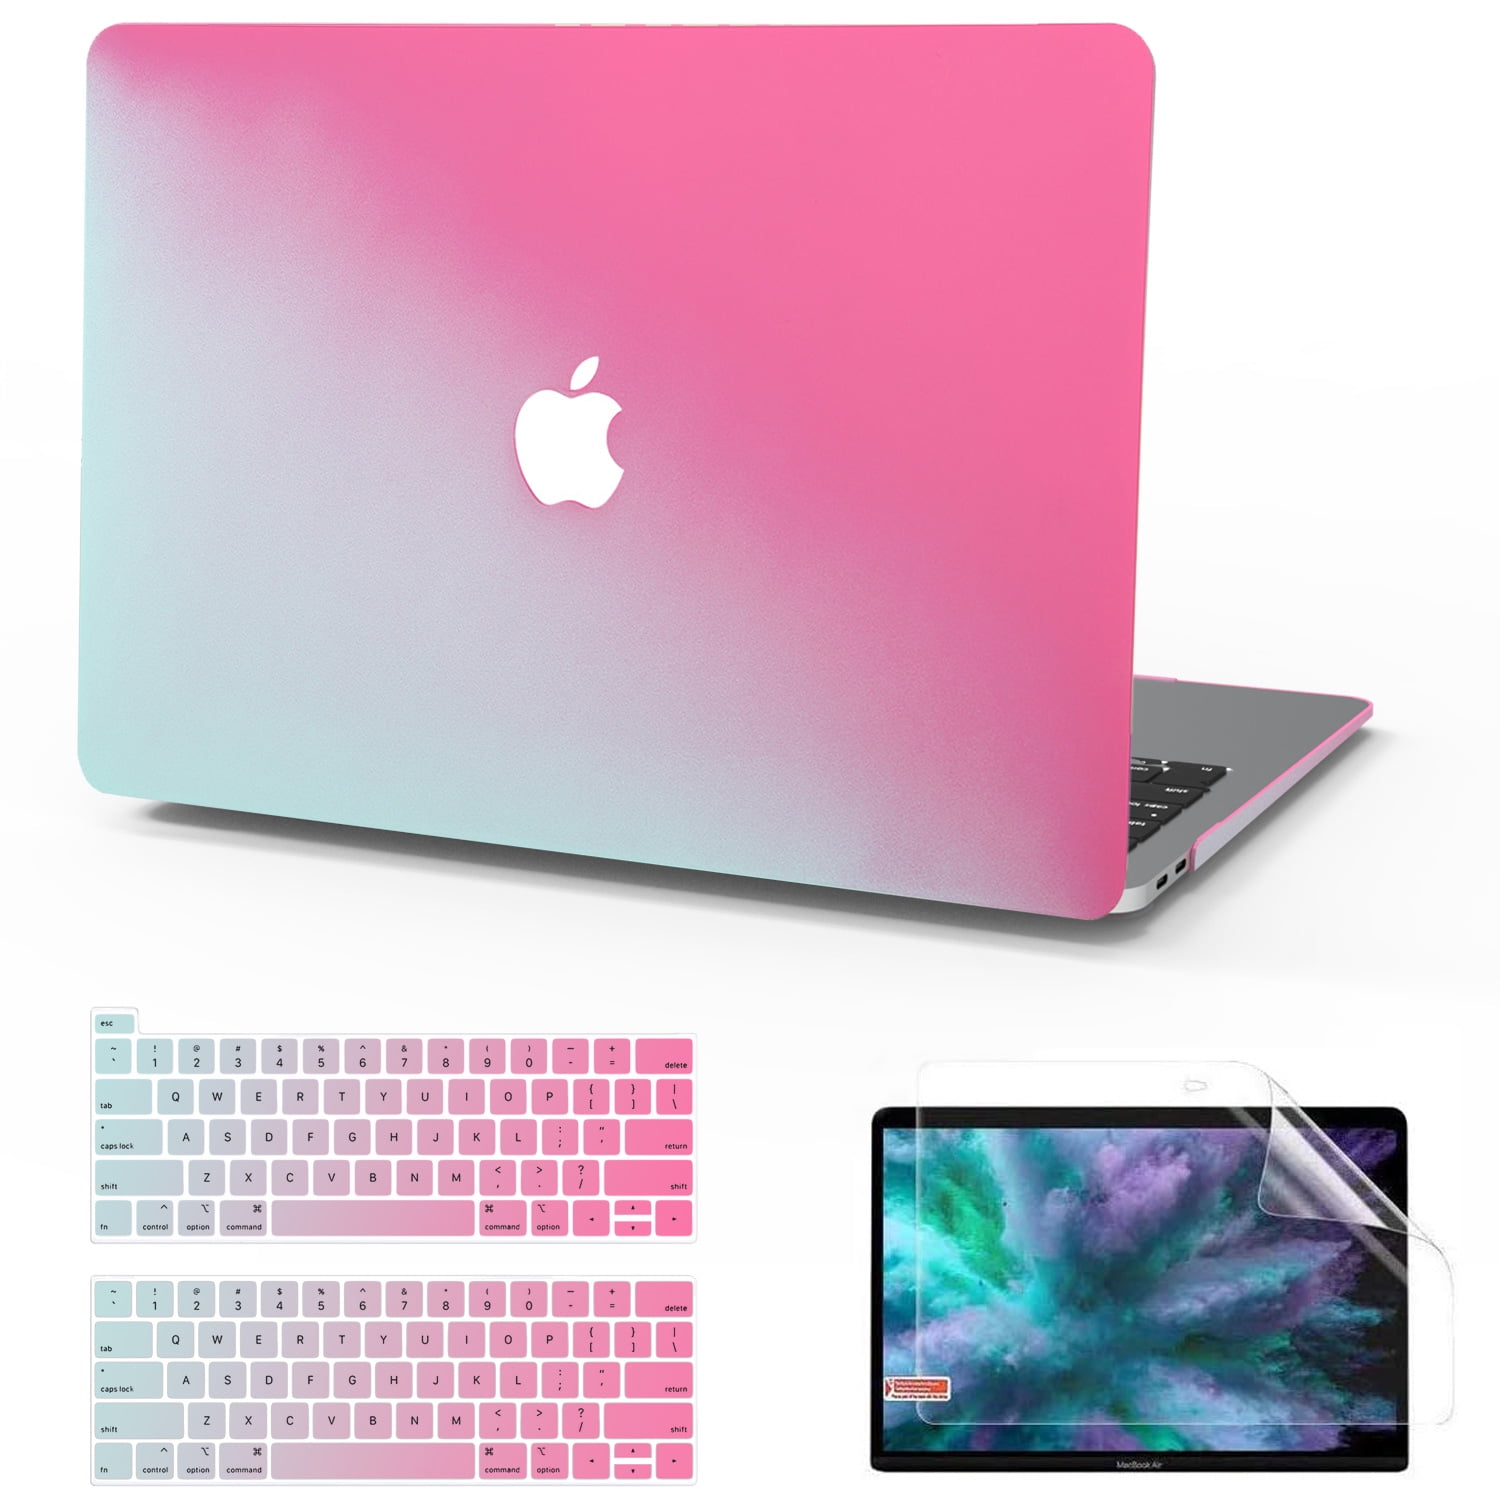 w/Keyboard Cover Plastic Hard Shell A2338 M1 A2289 A2251 Touch Bar 2 in 1 Bundle Rose Gold Sparkling KECC Leather Case Compatible with MacBook Pro 13 2021/2020 